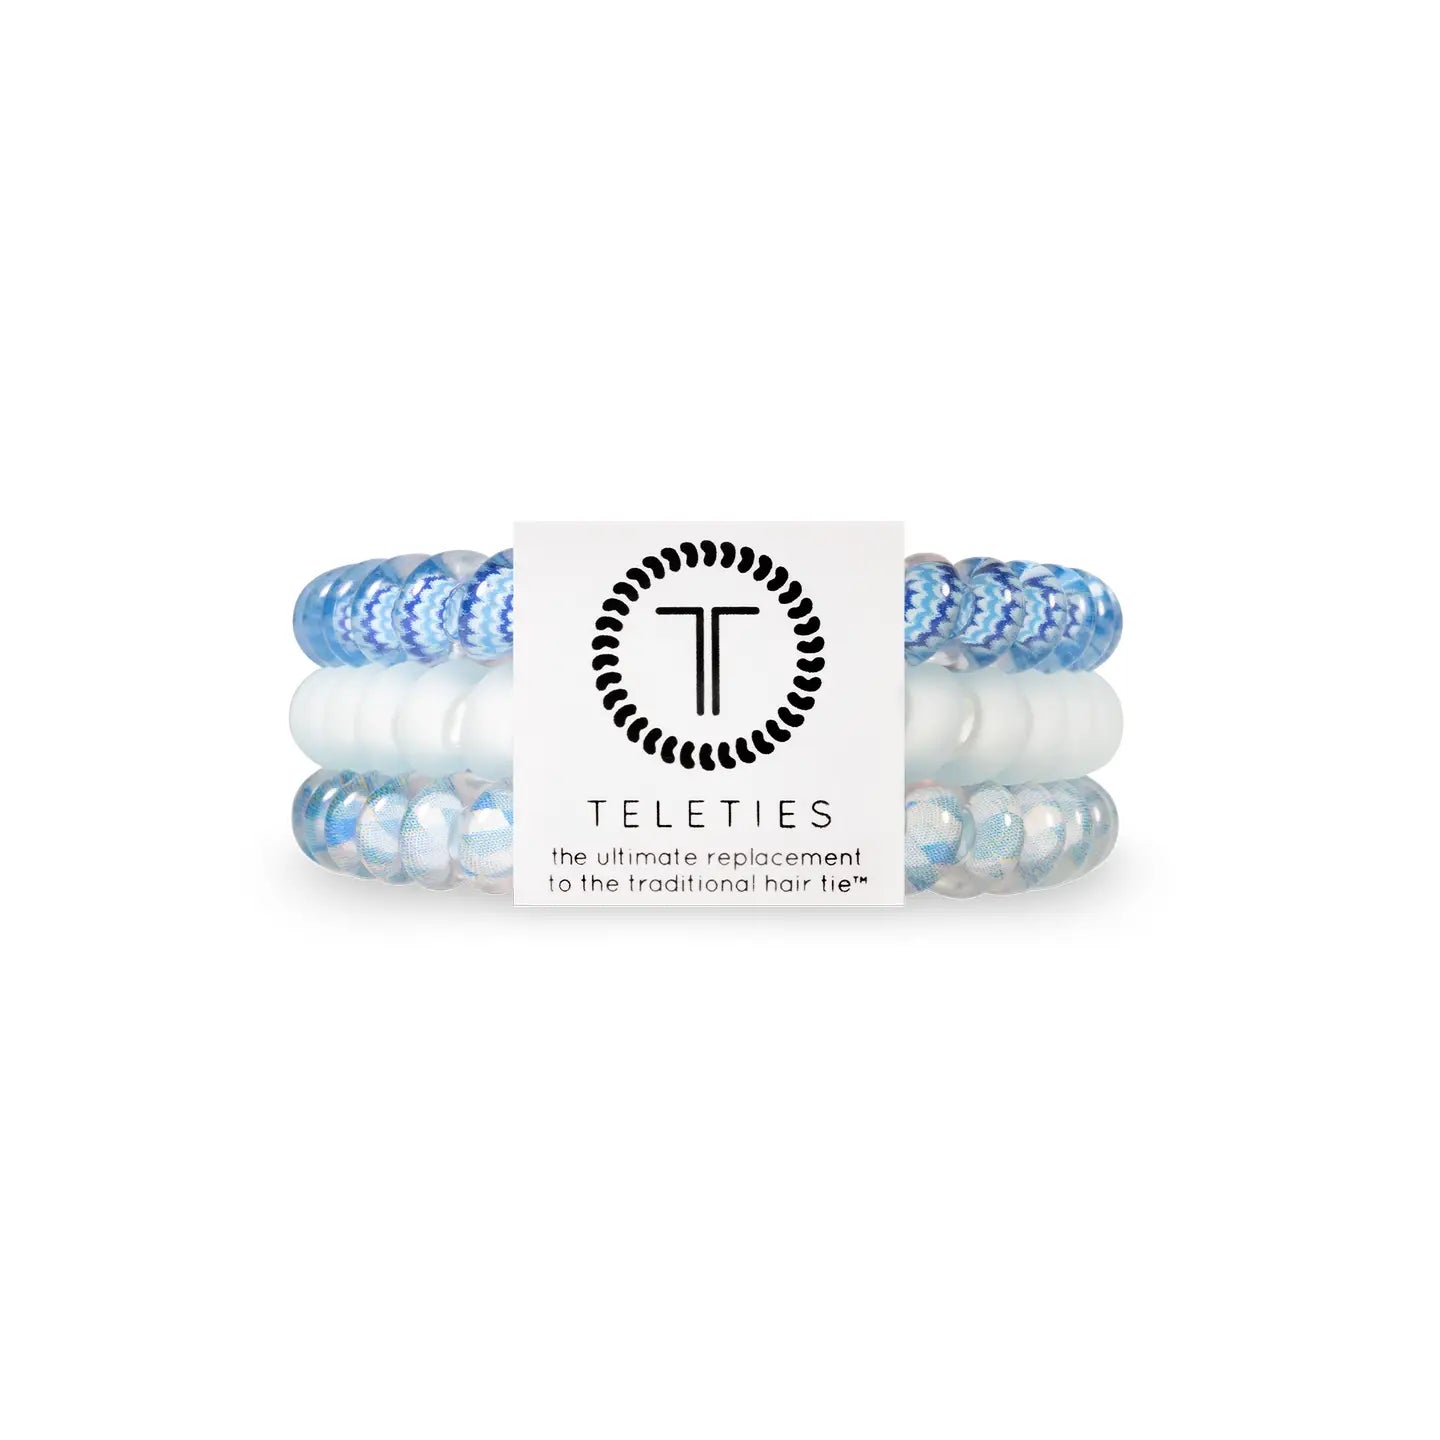 set of three hair coils: one chevoron blue mix one, one white matte, and one white with blue diamonds